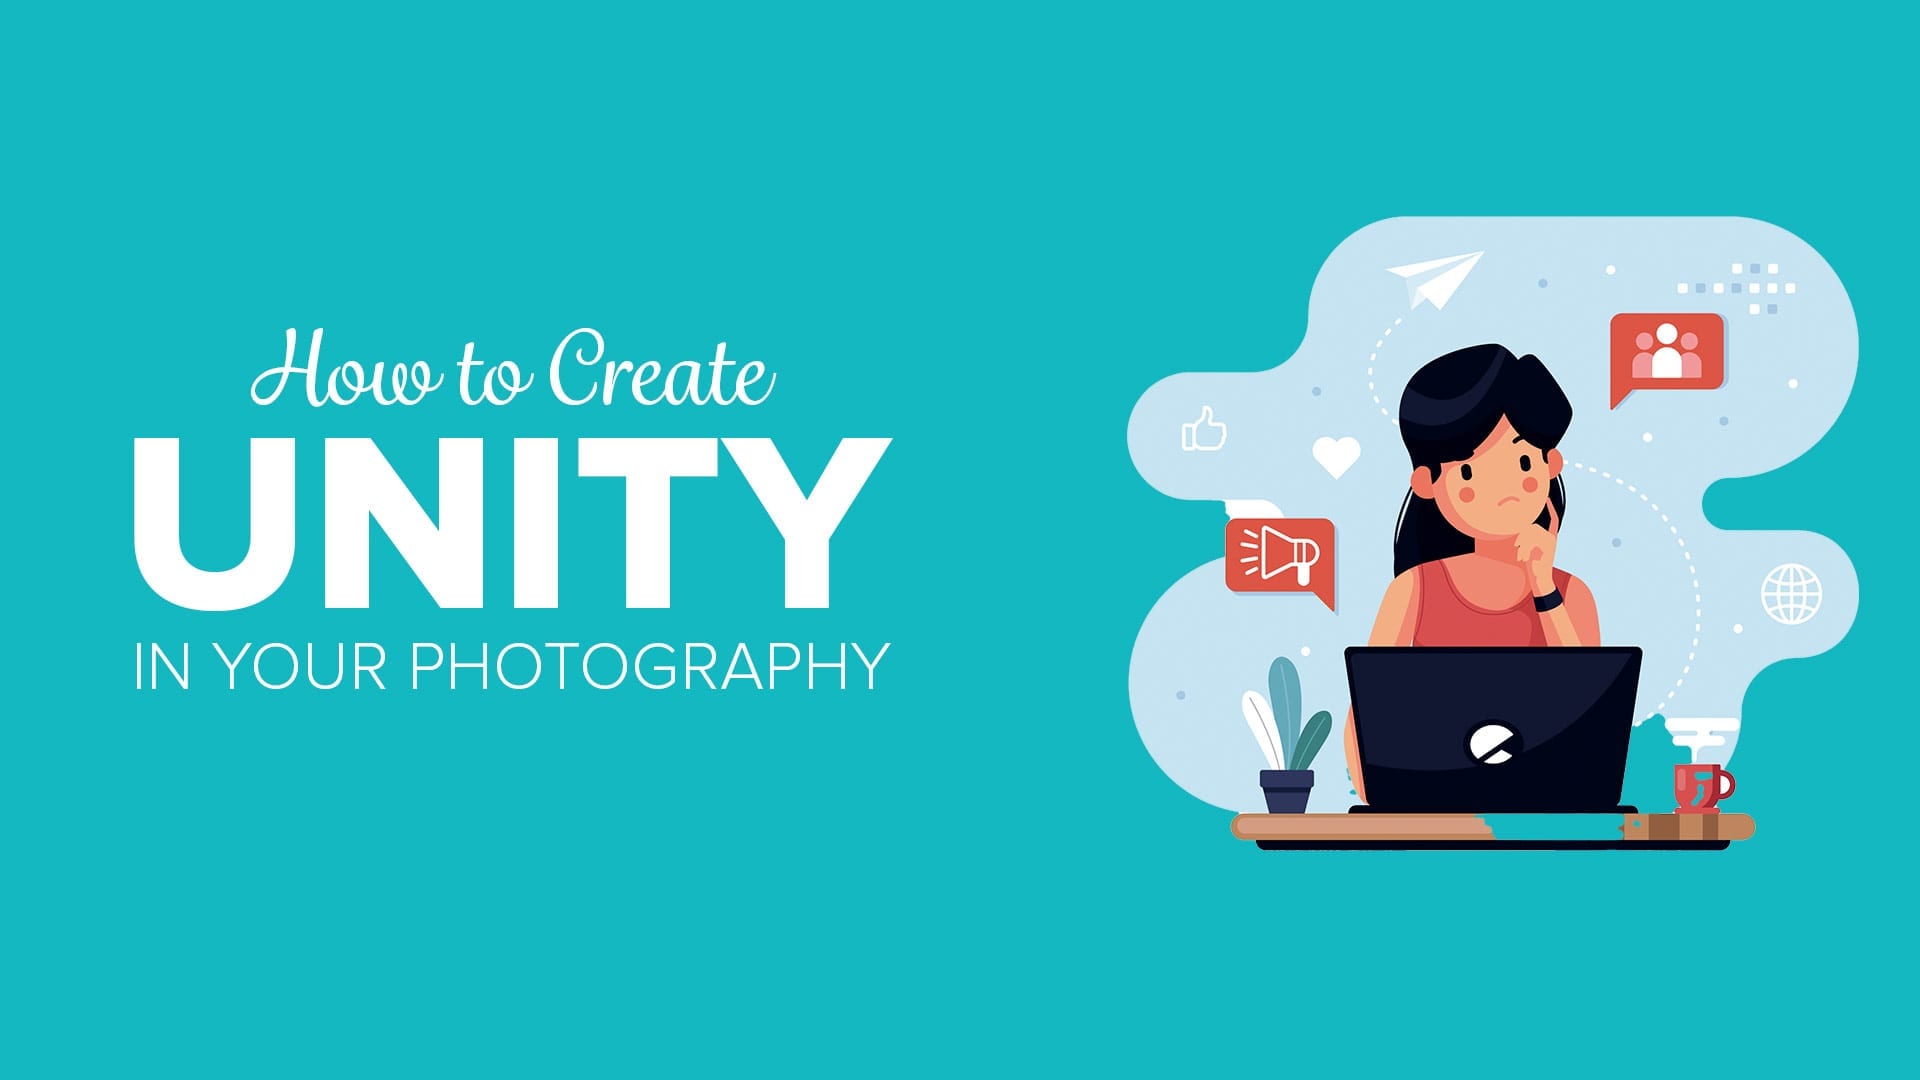 How to Create Unity in Your Photography